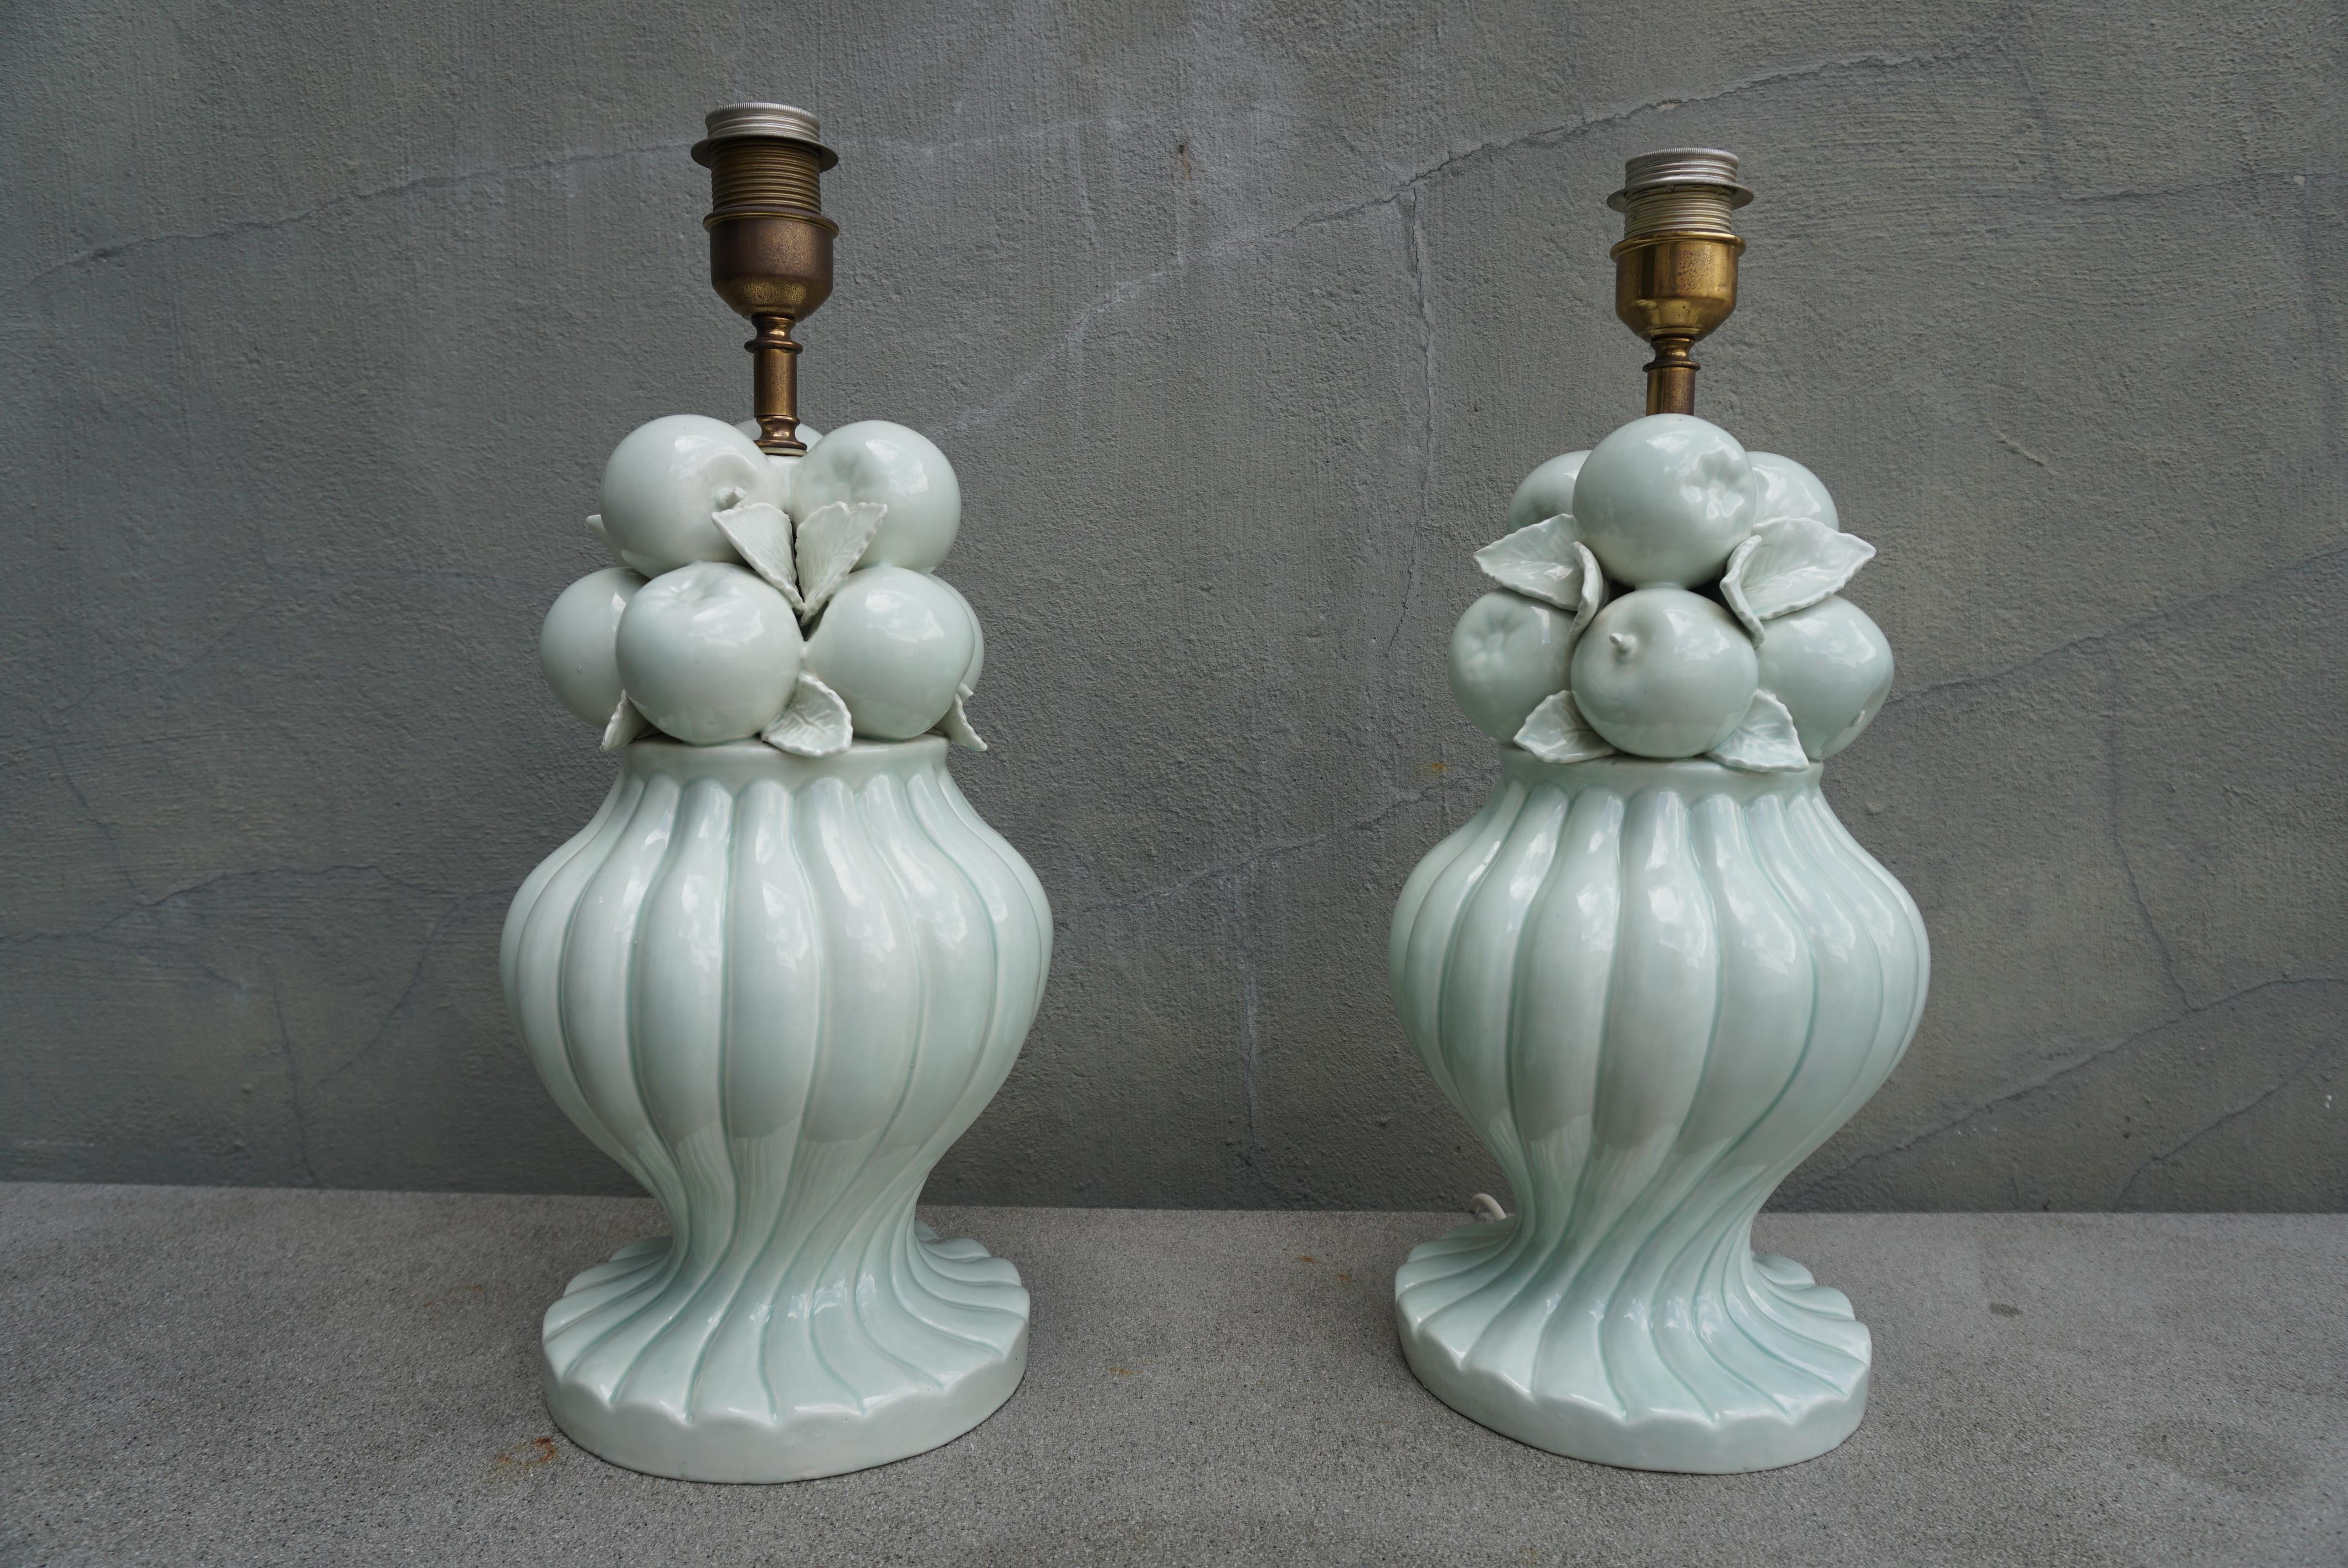 Pair of Italian ceramic fruit table lamps in mint green color by Bassanello. Nice shape and design, good condition.

Gorgeous porcelain table lamps with glossy mint green glaze!  Both signed Bassenello. (shades not included).

Measures: 8.2